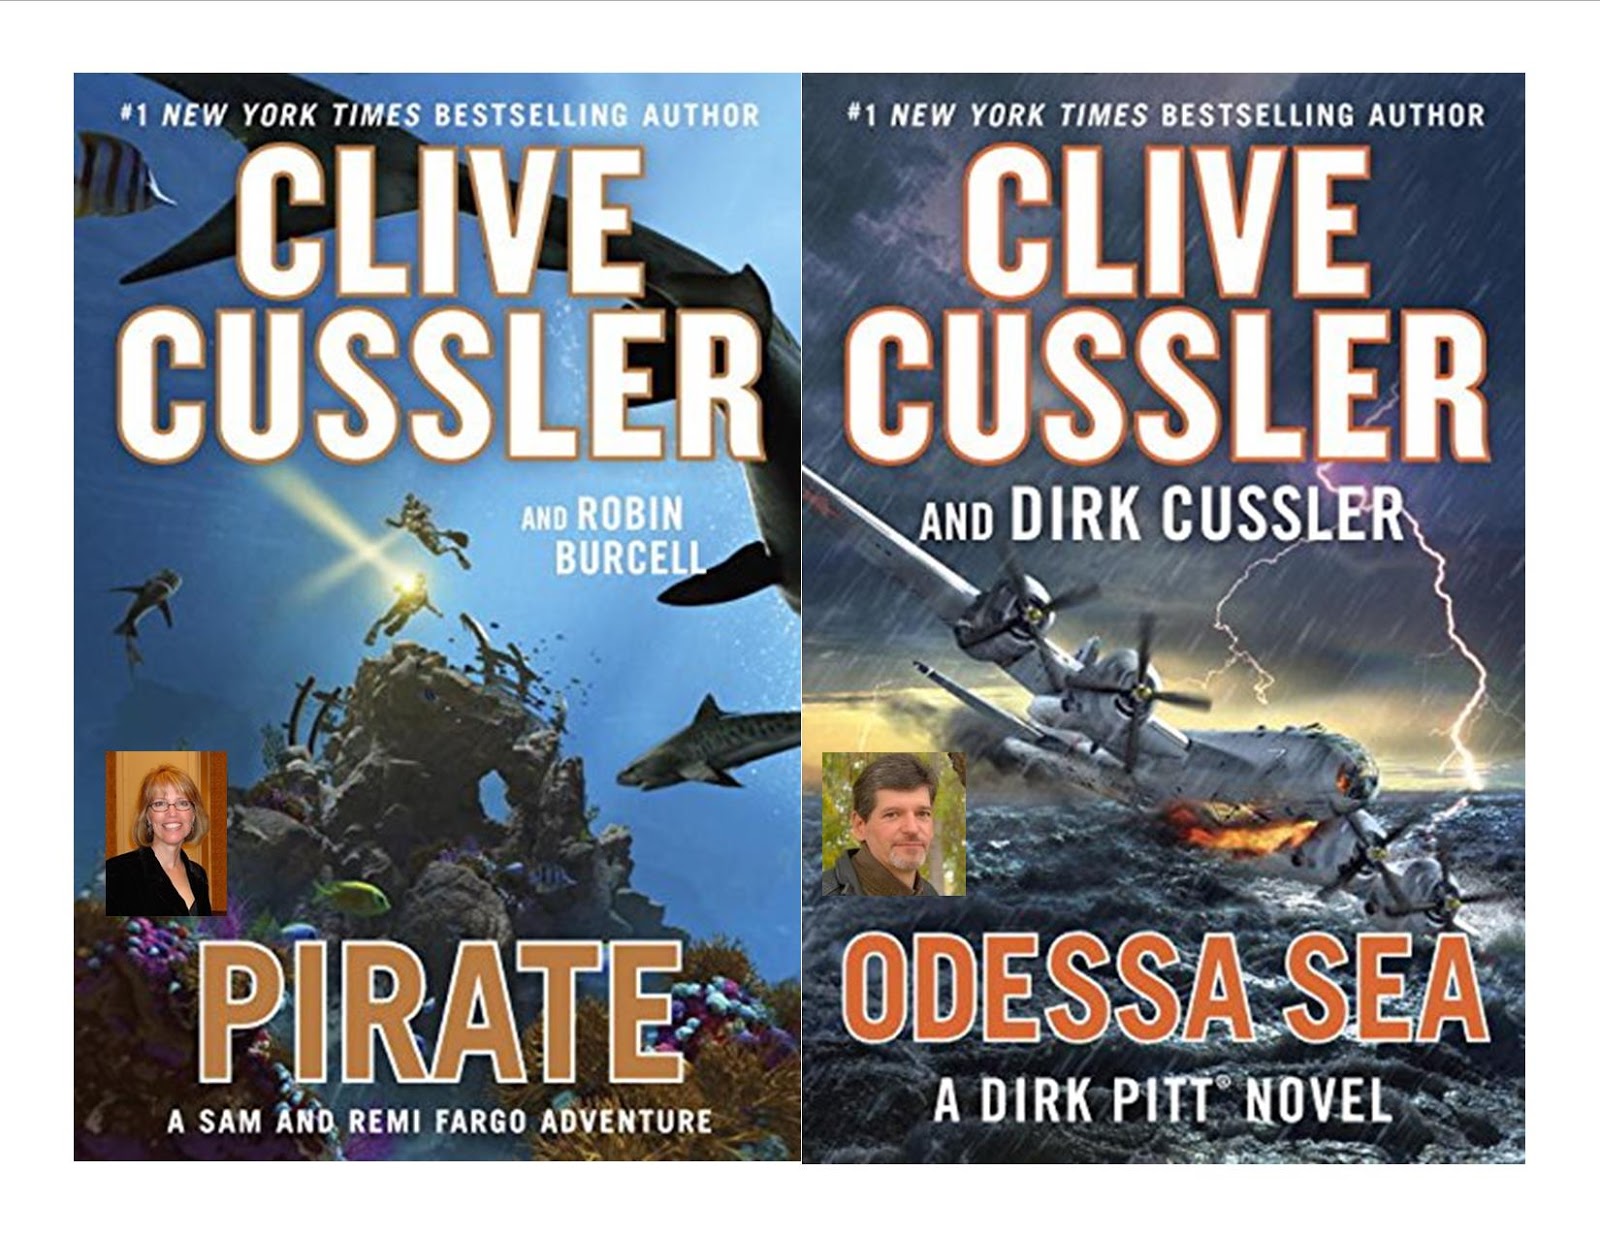 Clive Cussler Book Collecting Hardcover and Paperback releases for 2017